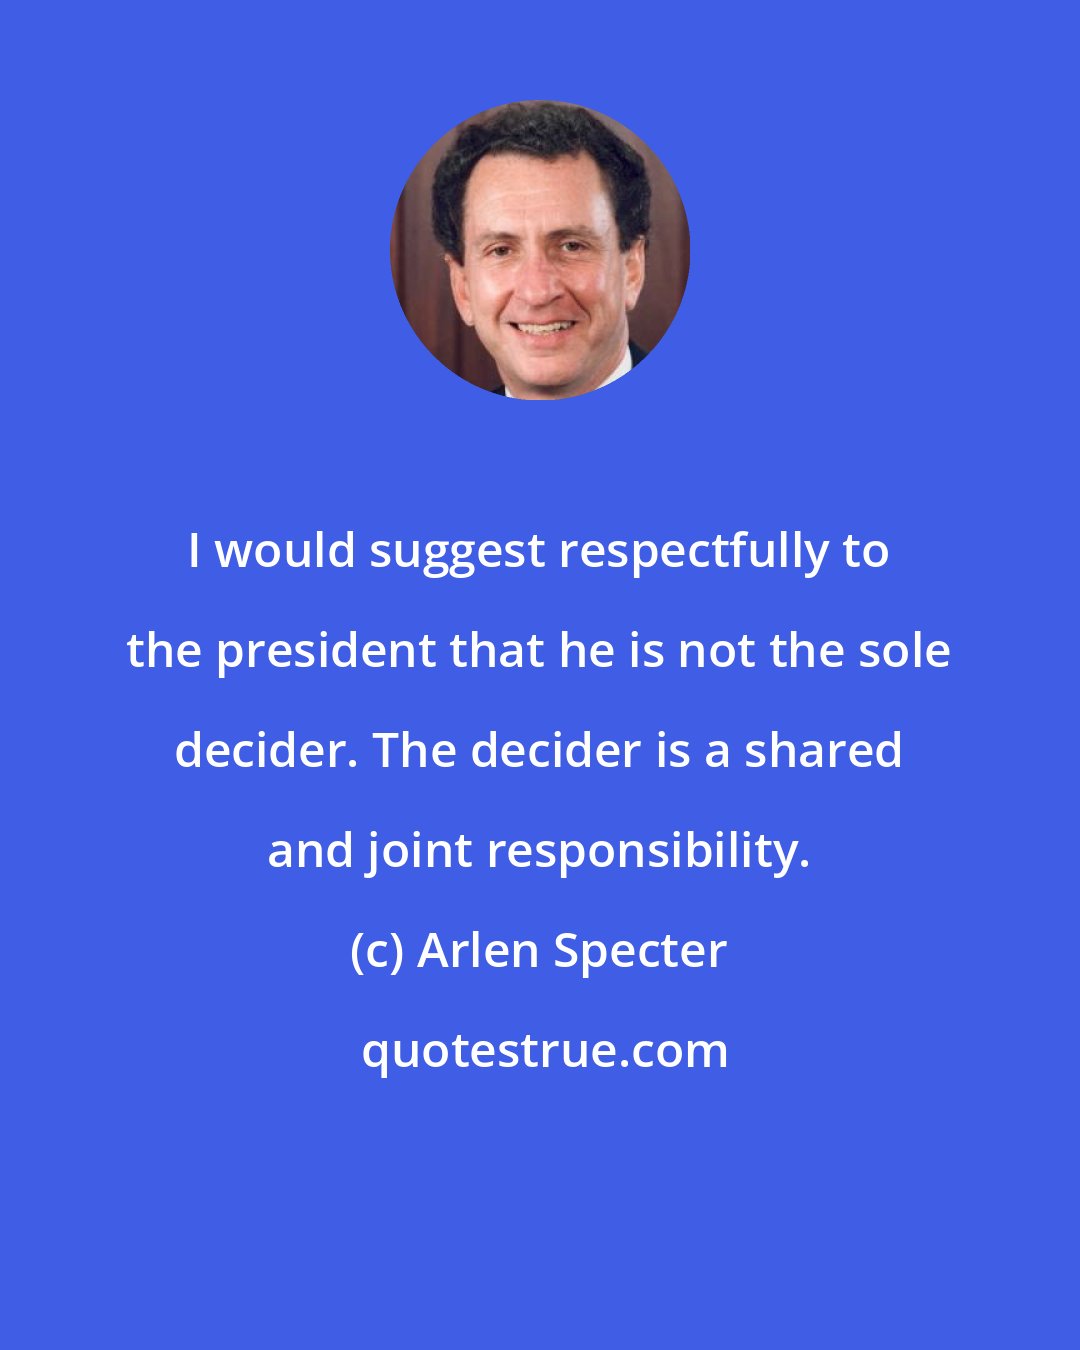 Arlen Specter: I would suggest respectfully to the president that he is not the sole decider. The decider is a shared and joint responsibility.